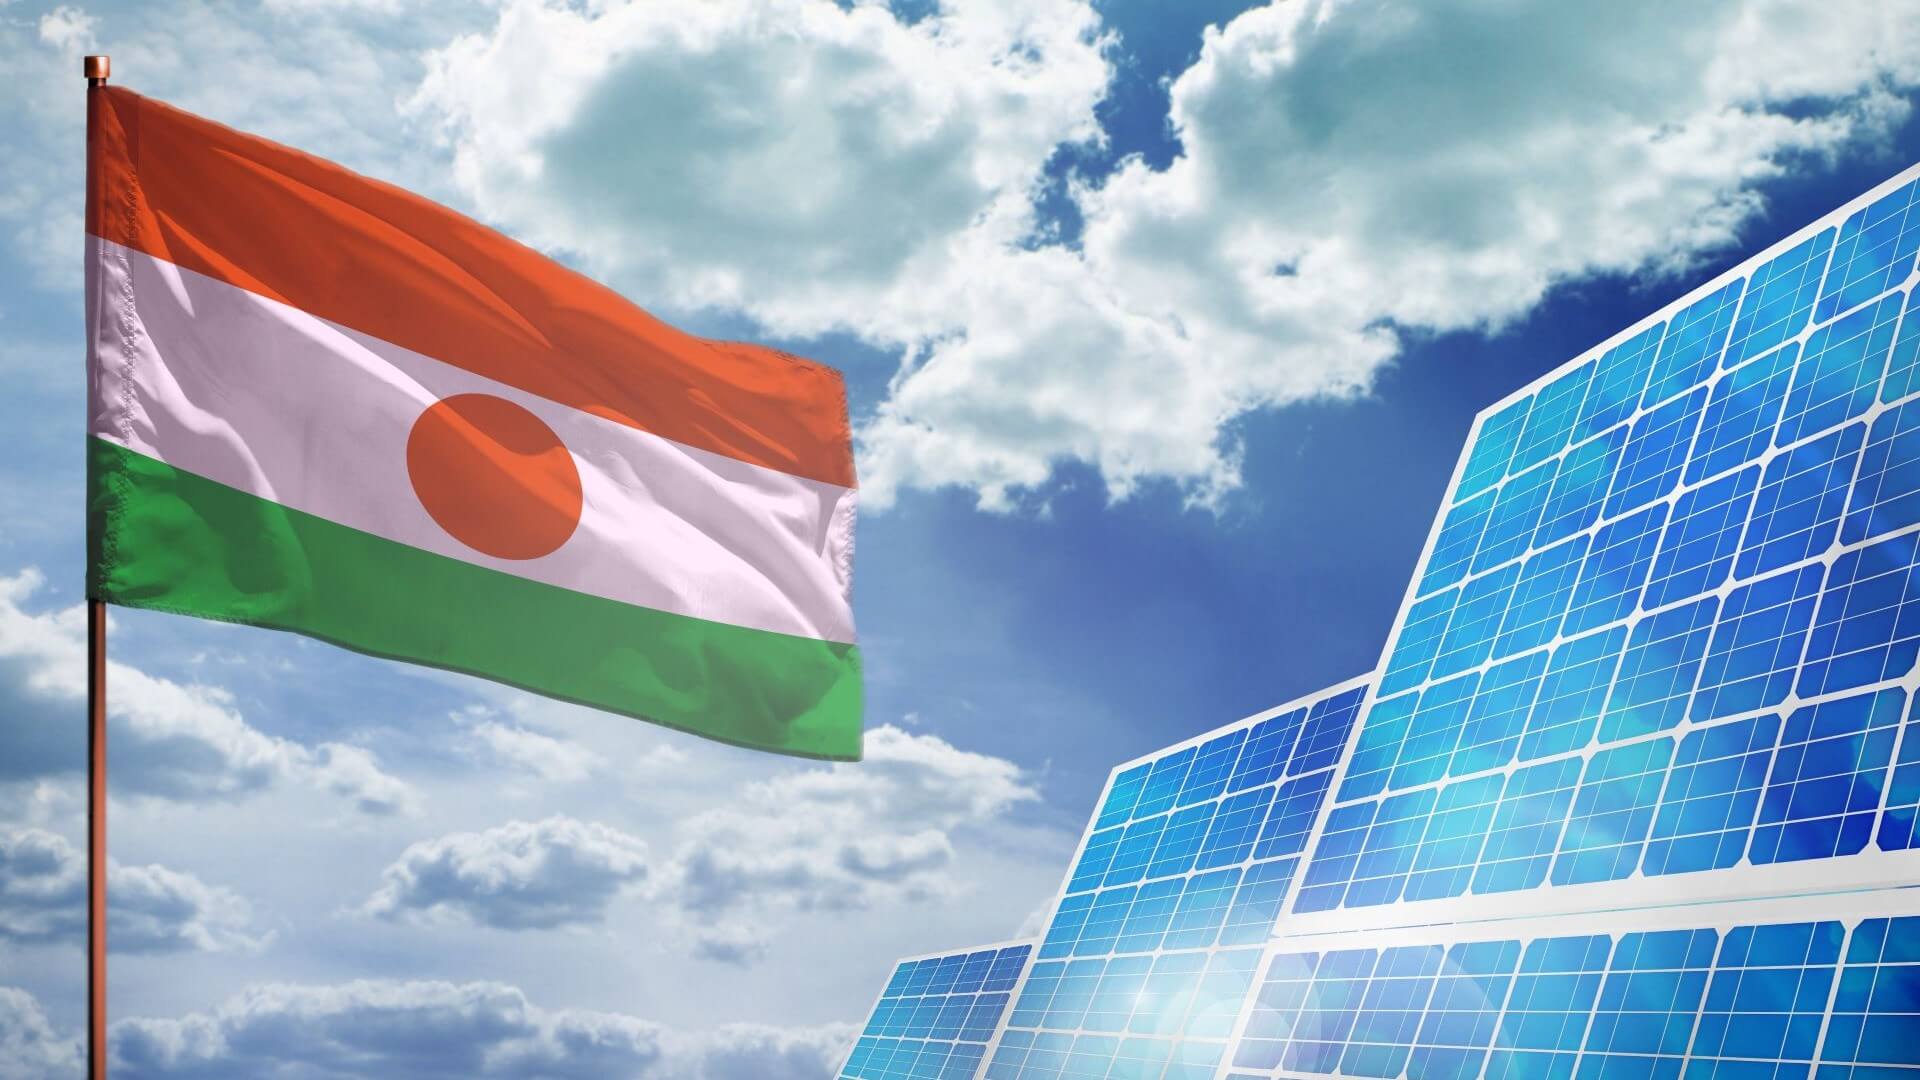 Niger flag and solar panel against blue sky